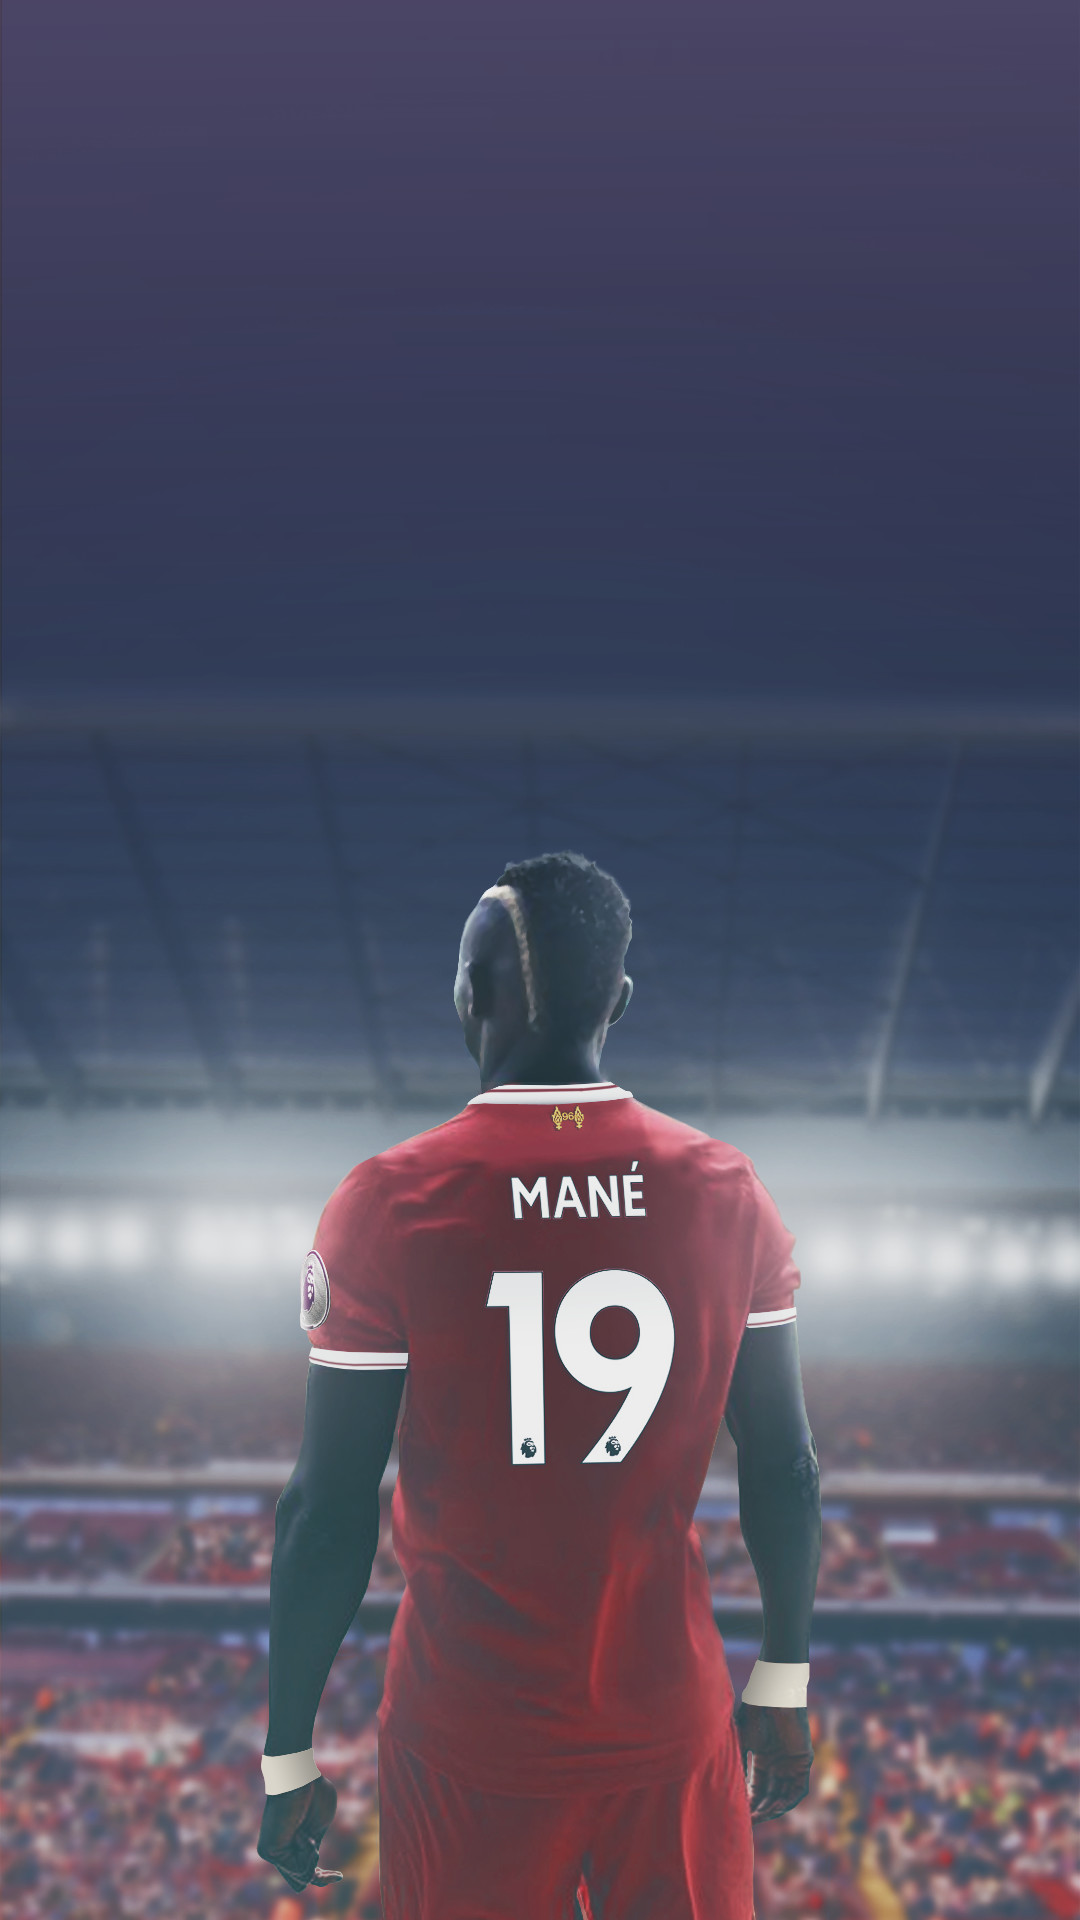 mane wallpaper,football player,player,sky,atmosphere,competition event